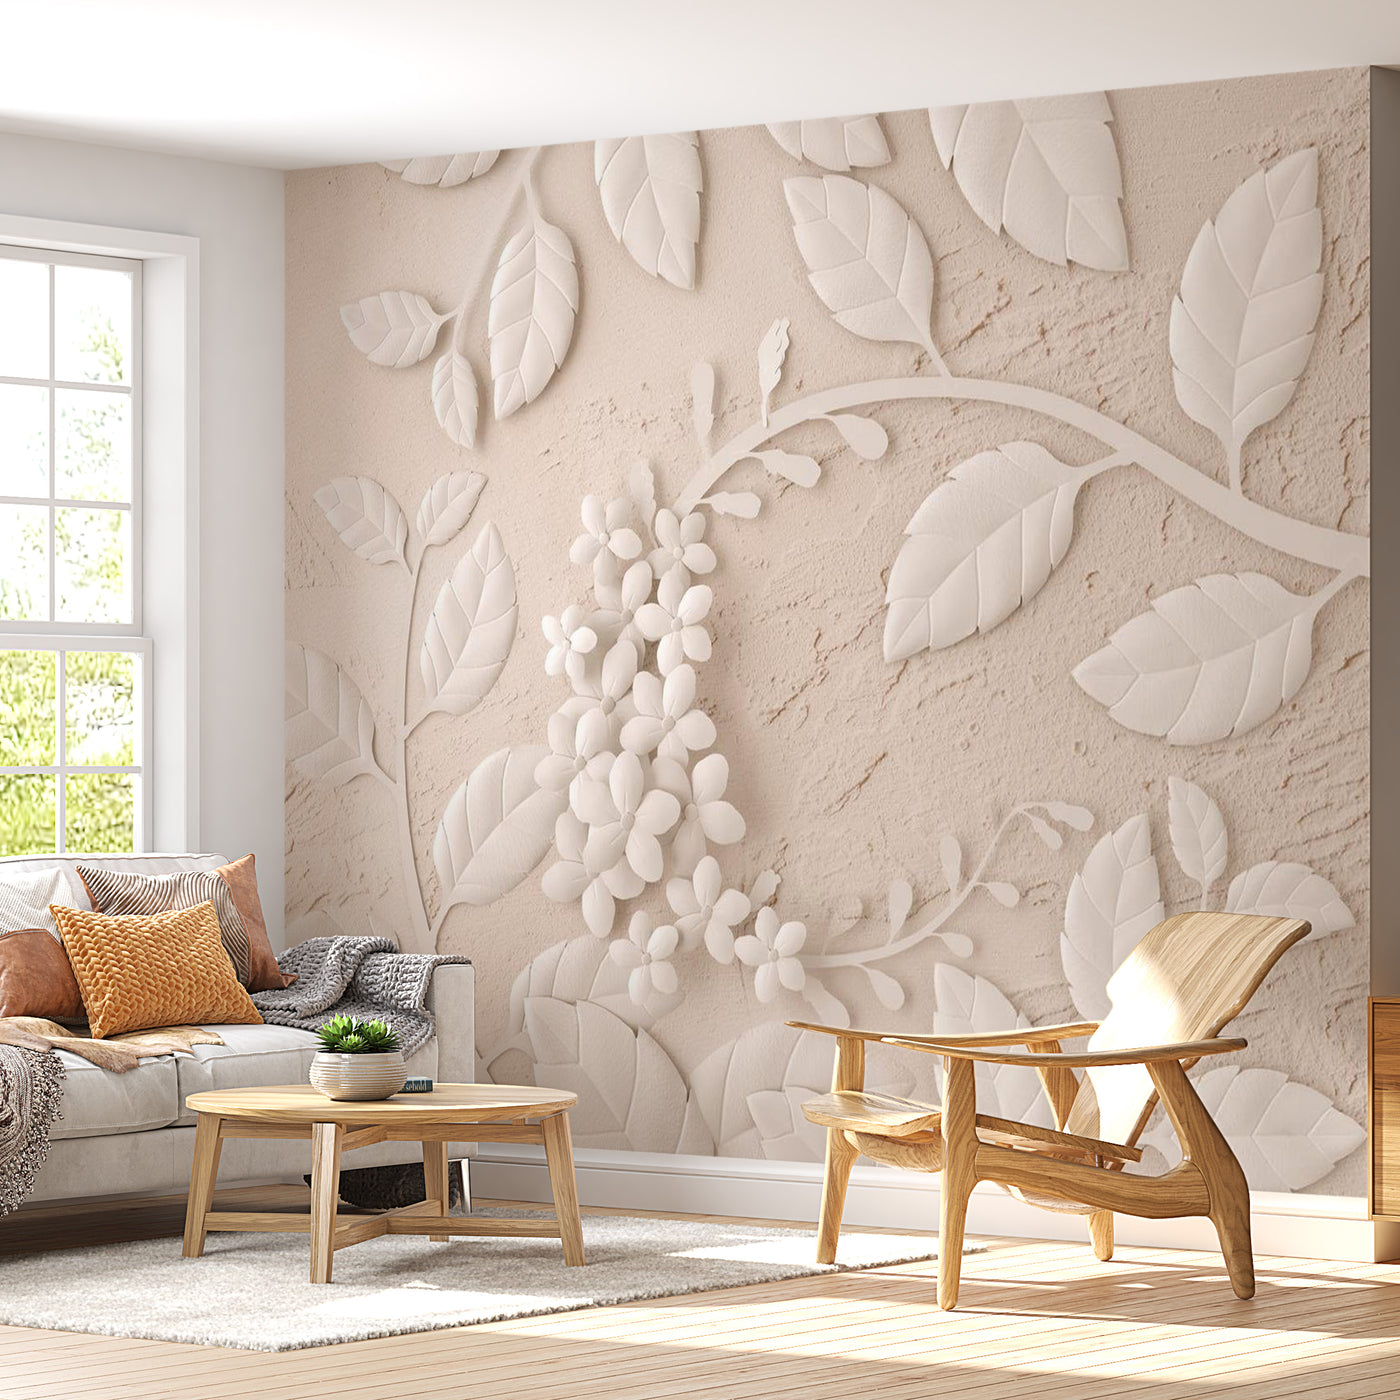 Peel & Stick Floral Wall Mural - Paper Flowers Beige - Removable Wall Decals